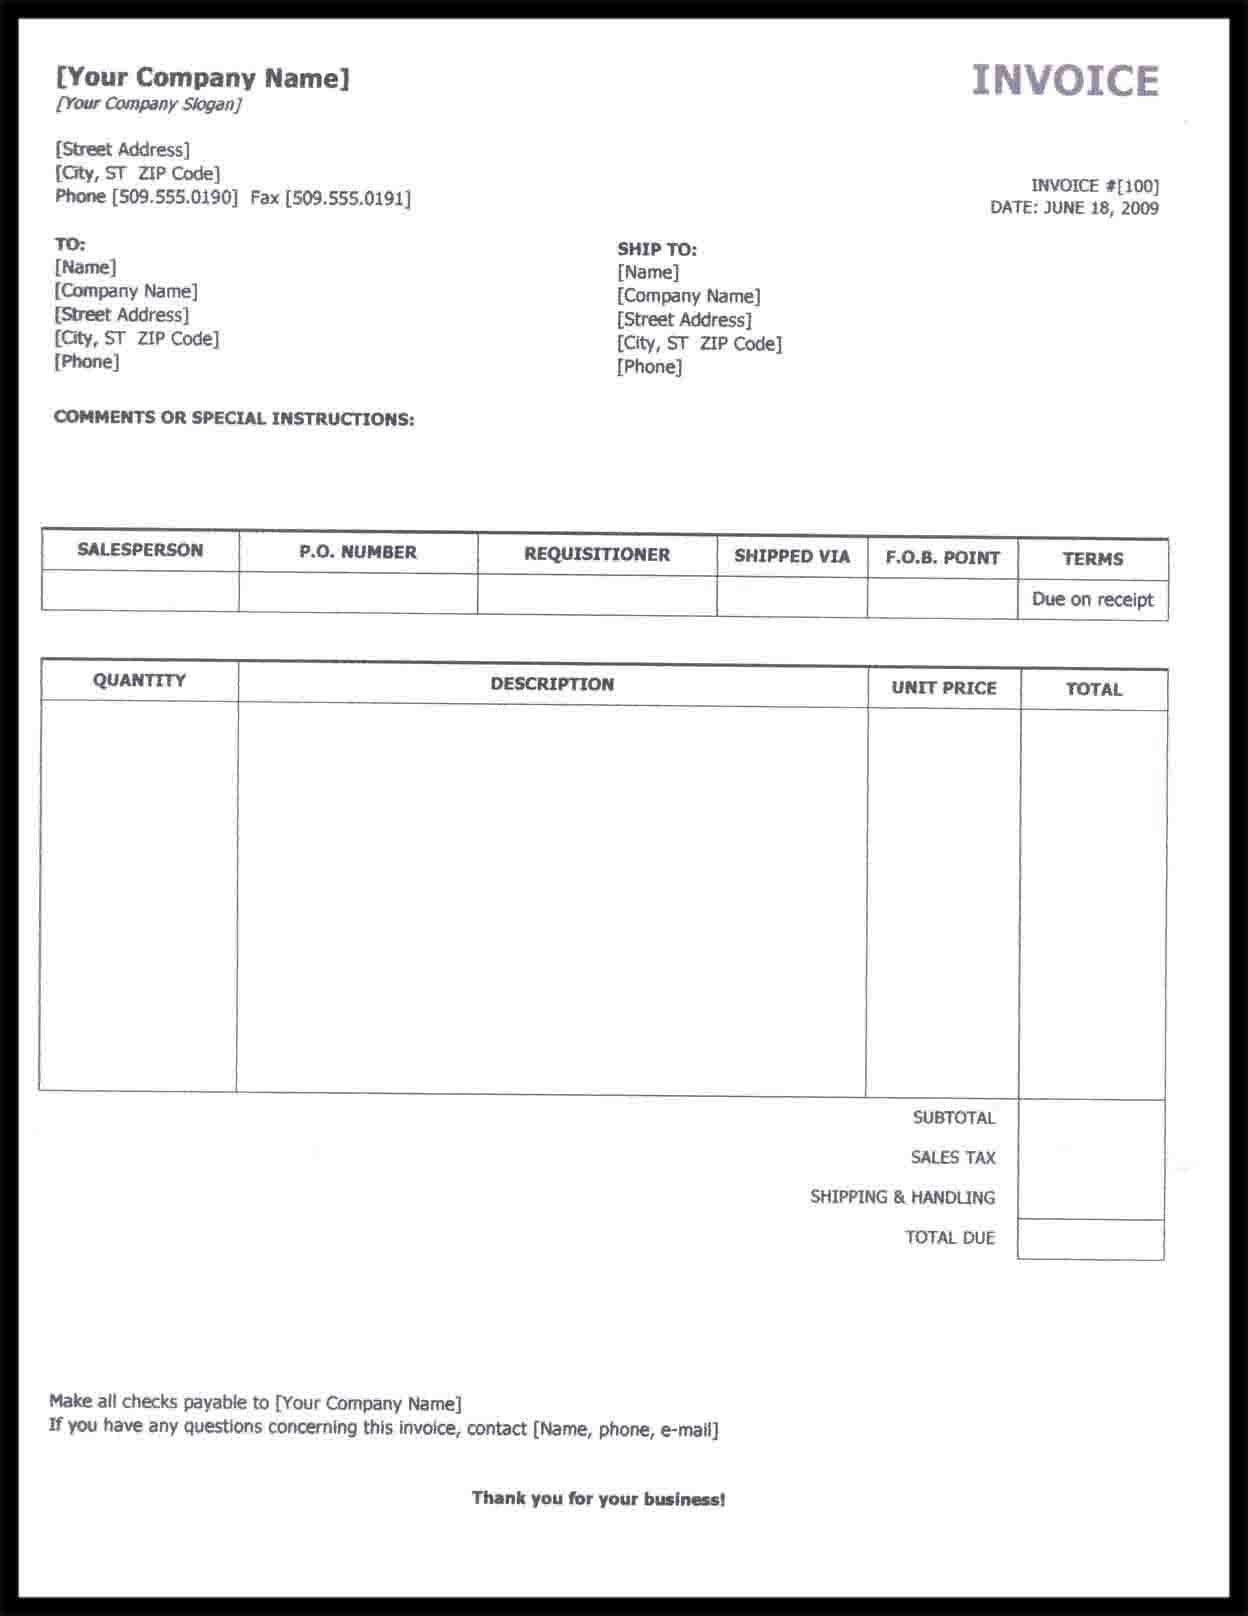 Invoice Sample Doc Download Word Templates Free Uk Template Tnt throughout Invoice Template Uk Doc